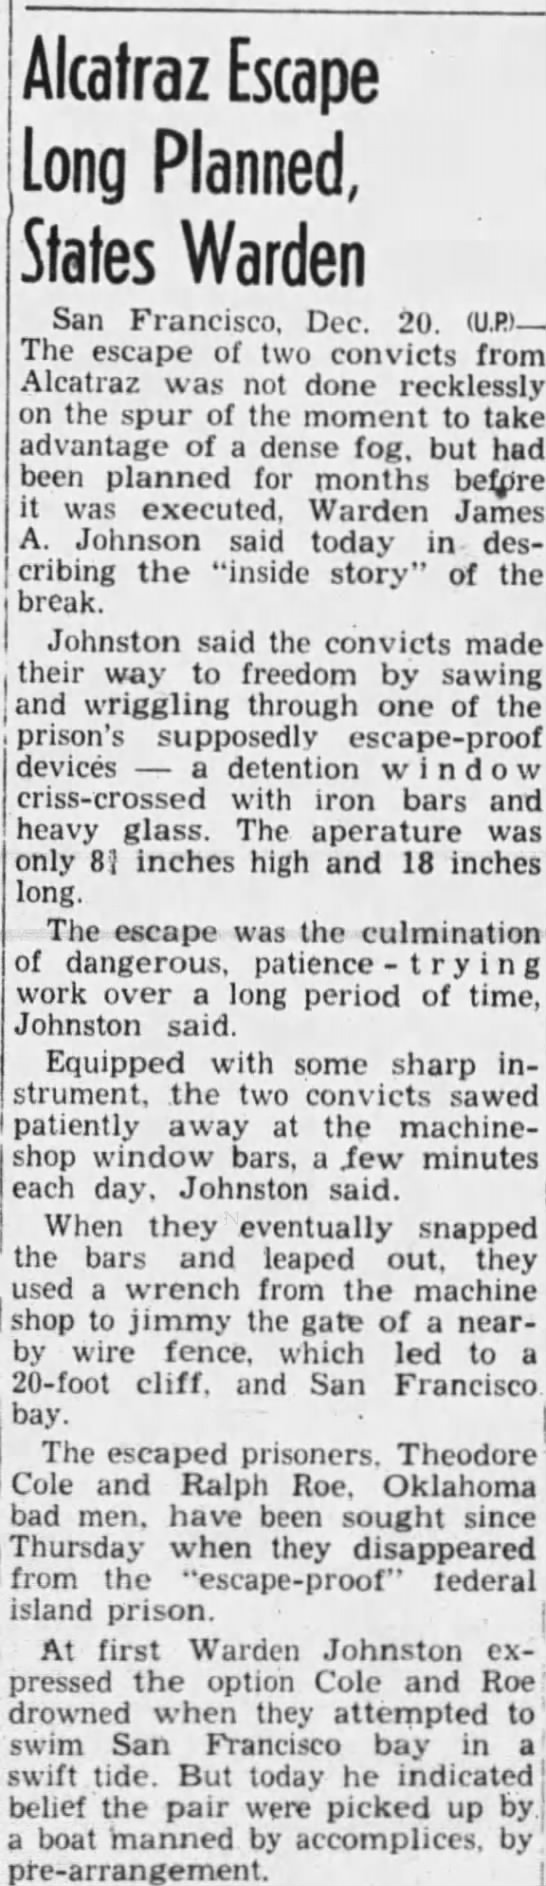 Two convicts attempt to escape from Alcatraz; Authorities unsure whether they drowned or survived - 